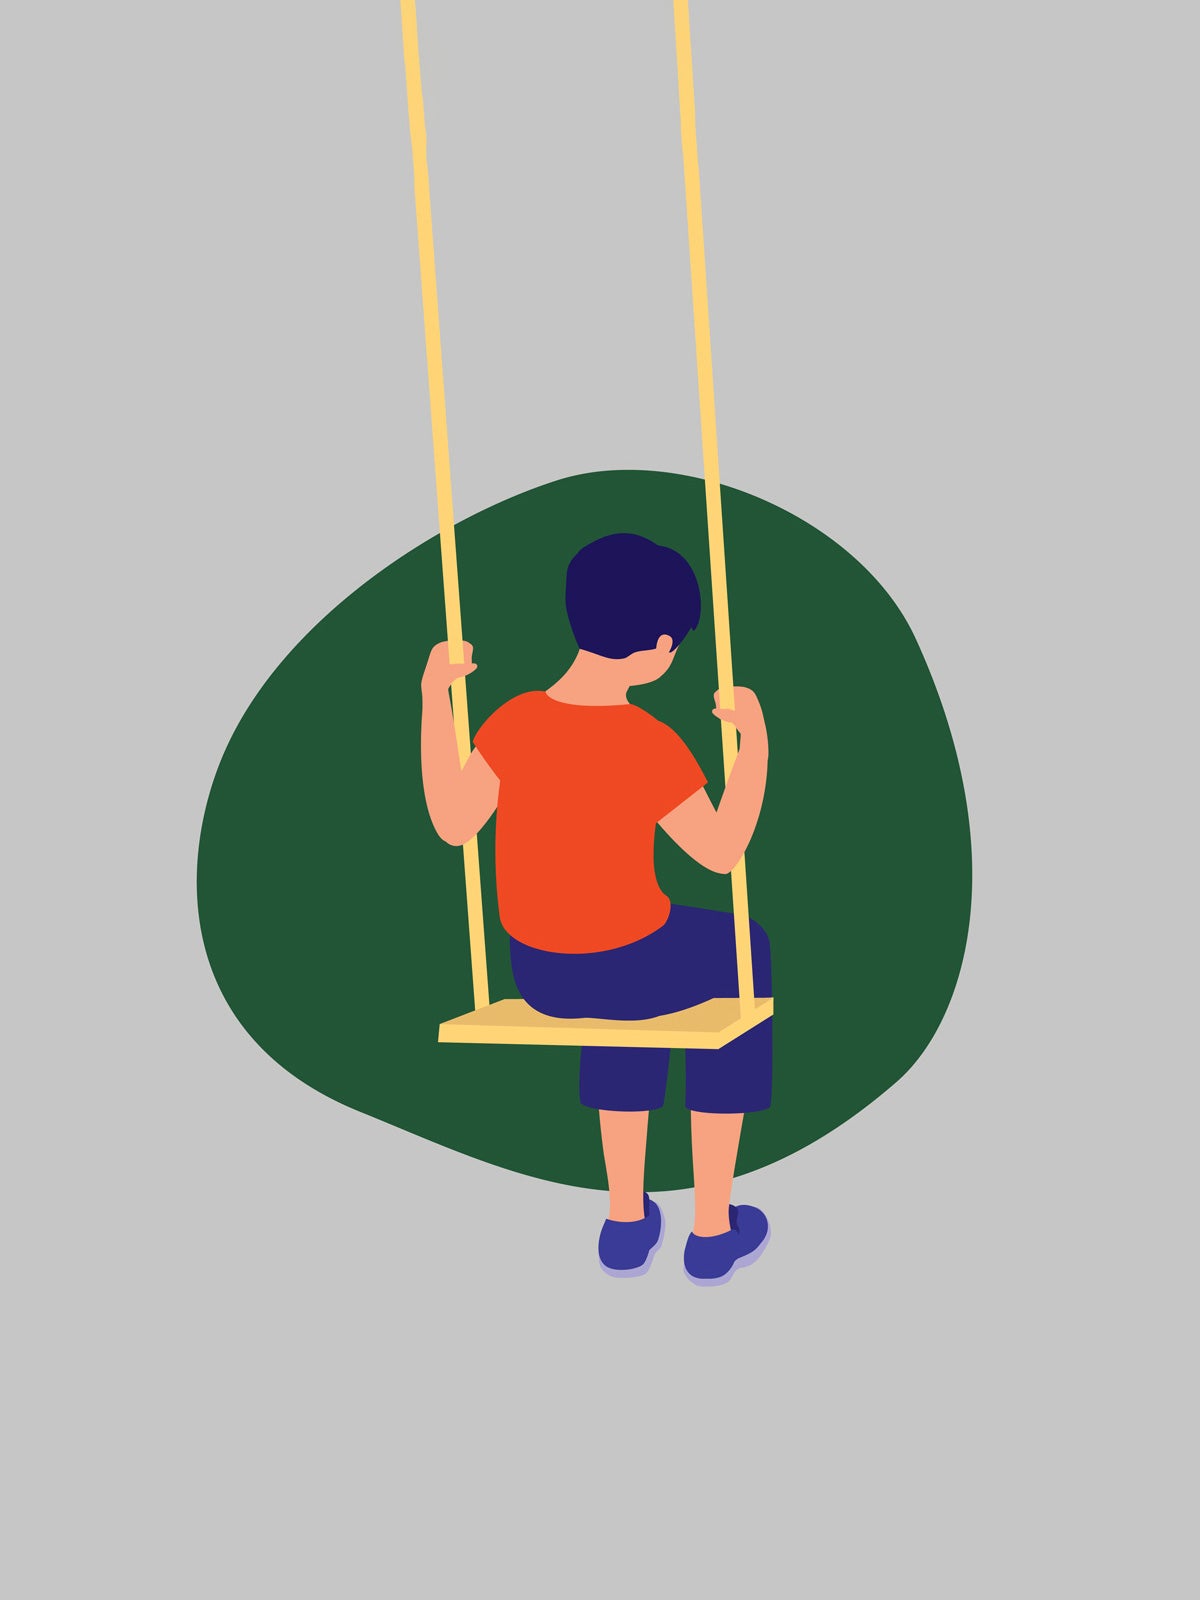 Illustration: A child yellow sits on a swing, facing away from the viewer. They are wearing purple pants and shoes, and an orange shirt. The figure is in an organic green circular shape, and the background of the entire image is gray.